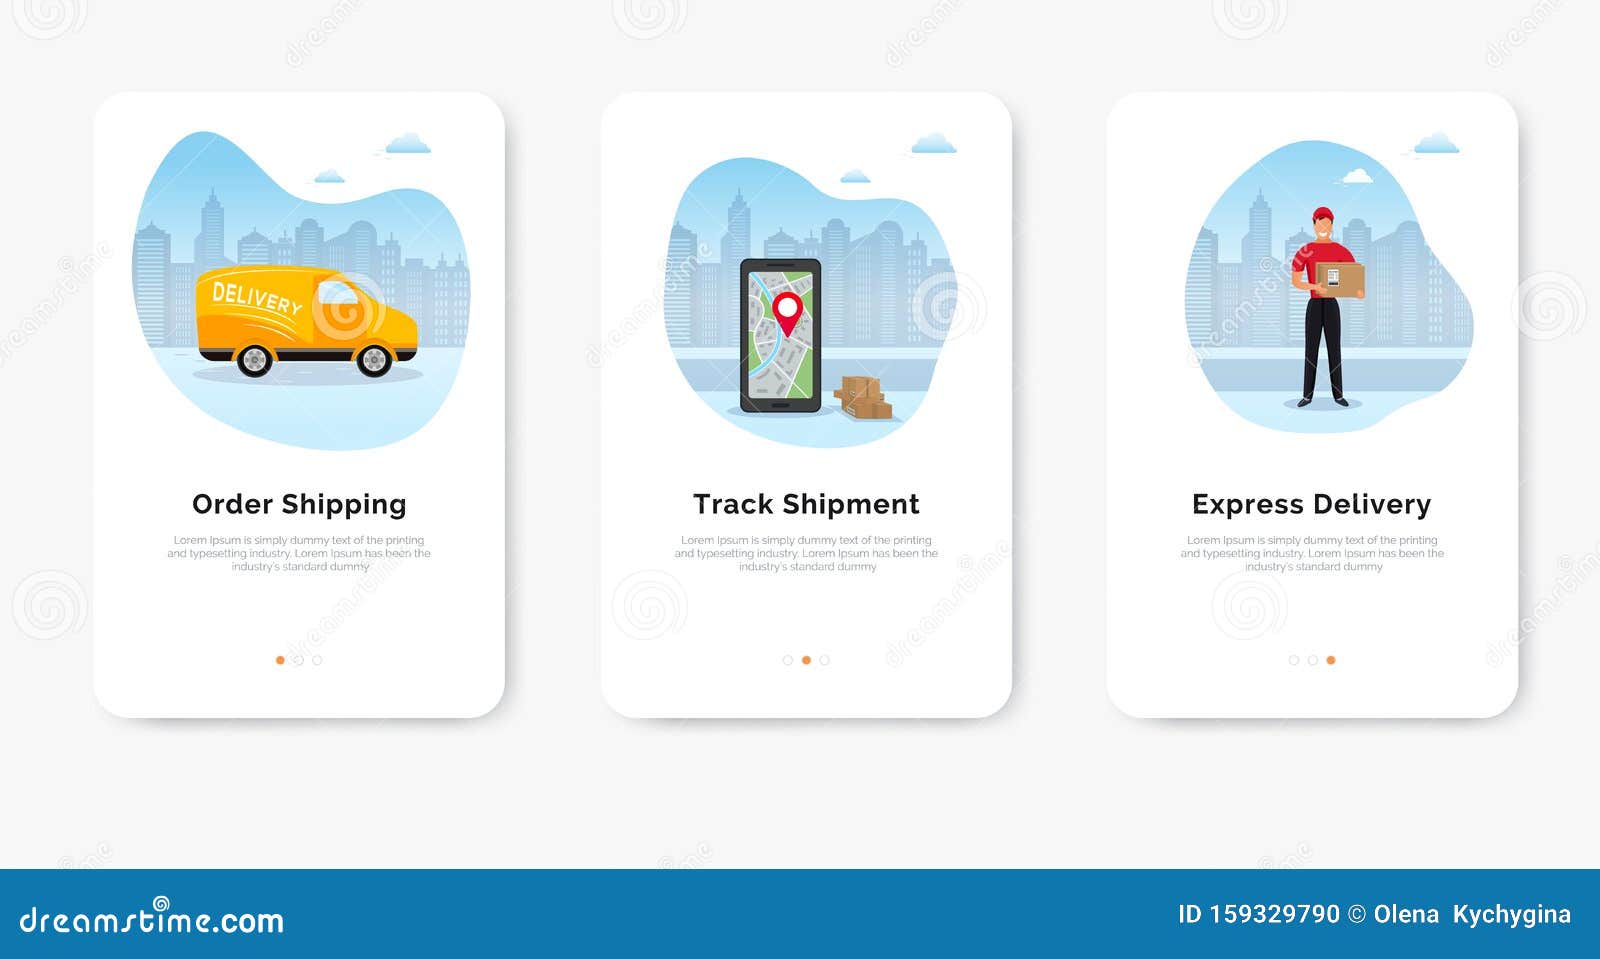 Express  shipping With Tracking